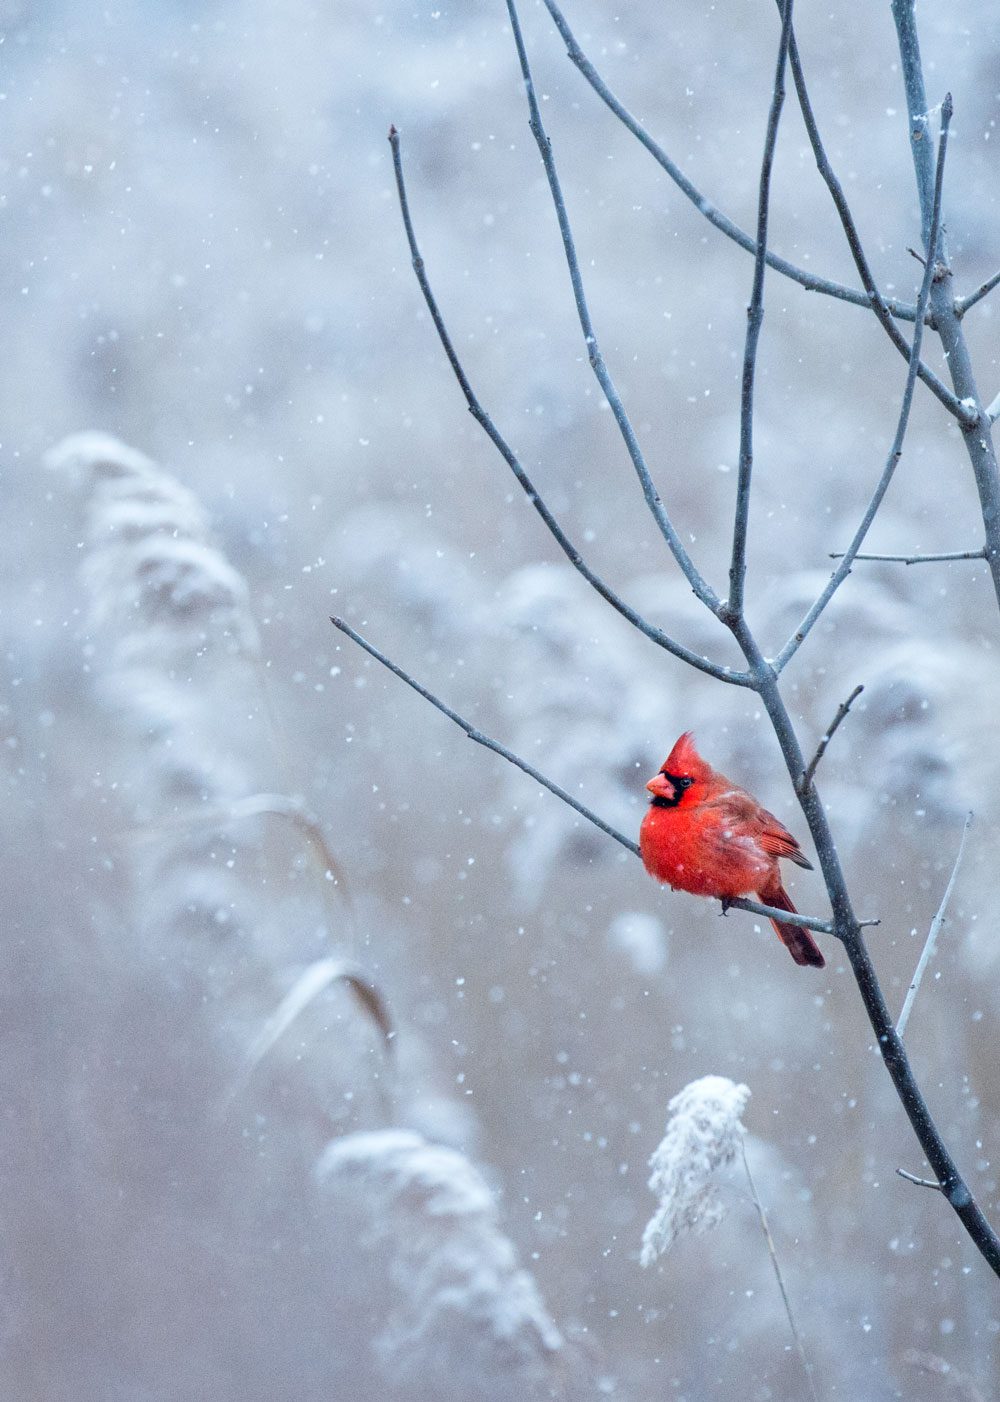 NOrthern Cardinal in the snow. Photo by Ray Hennessy.